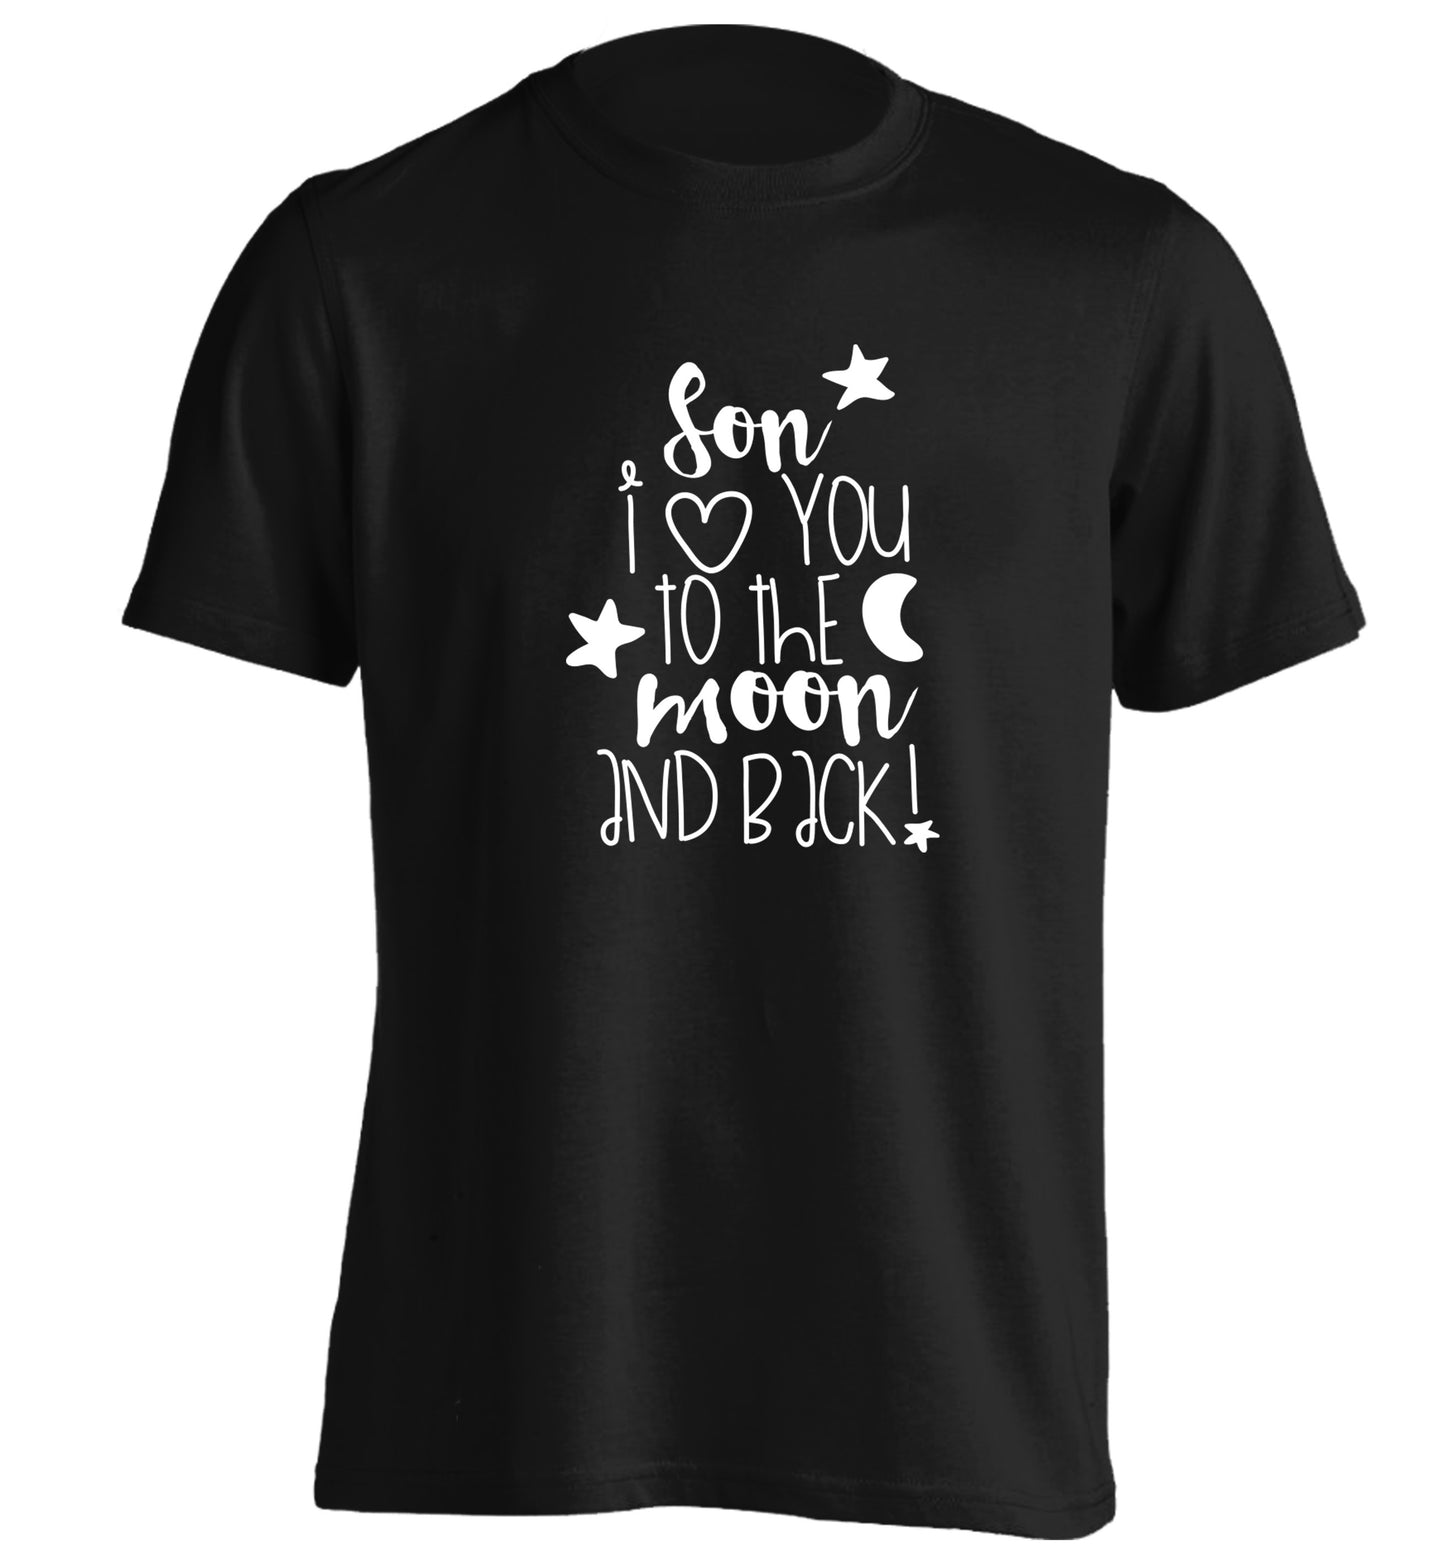 Son I love you to the moon and back adults unisex black Tshirt 2XL